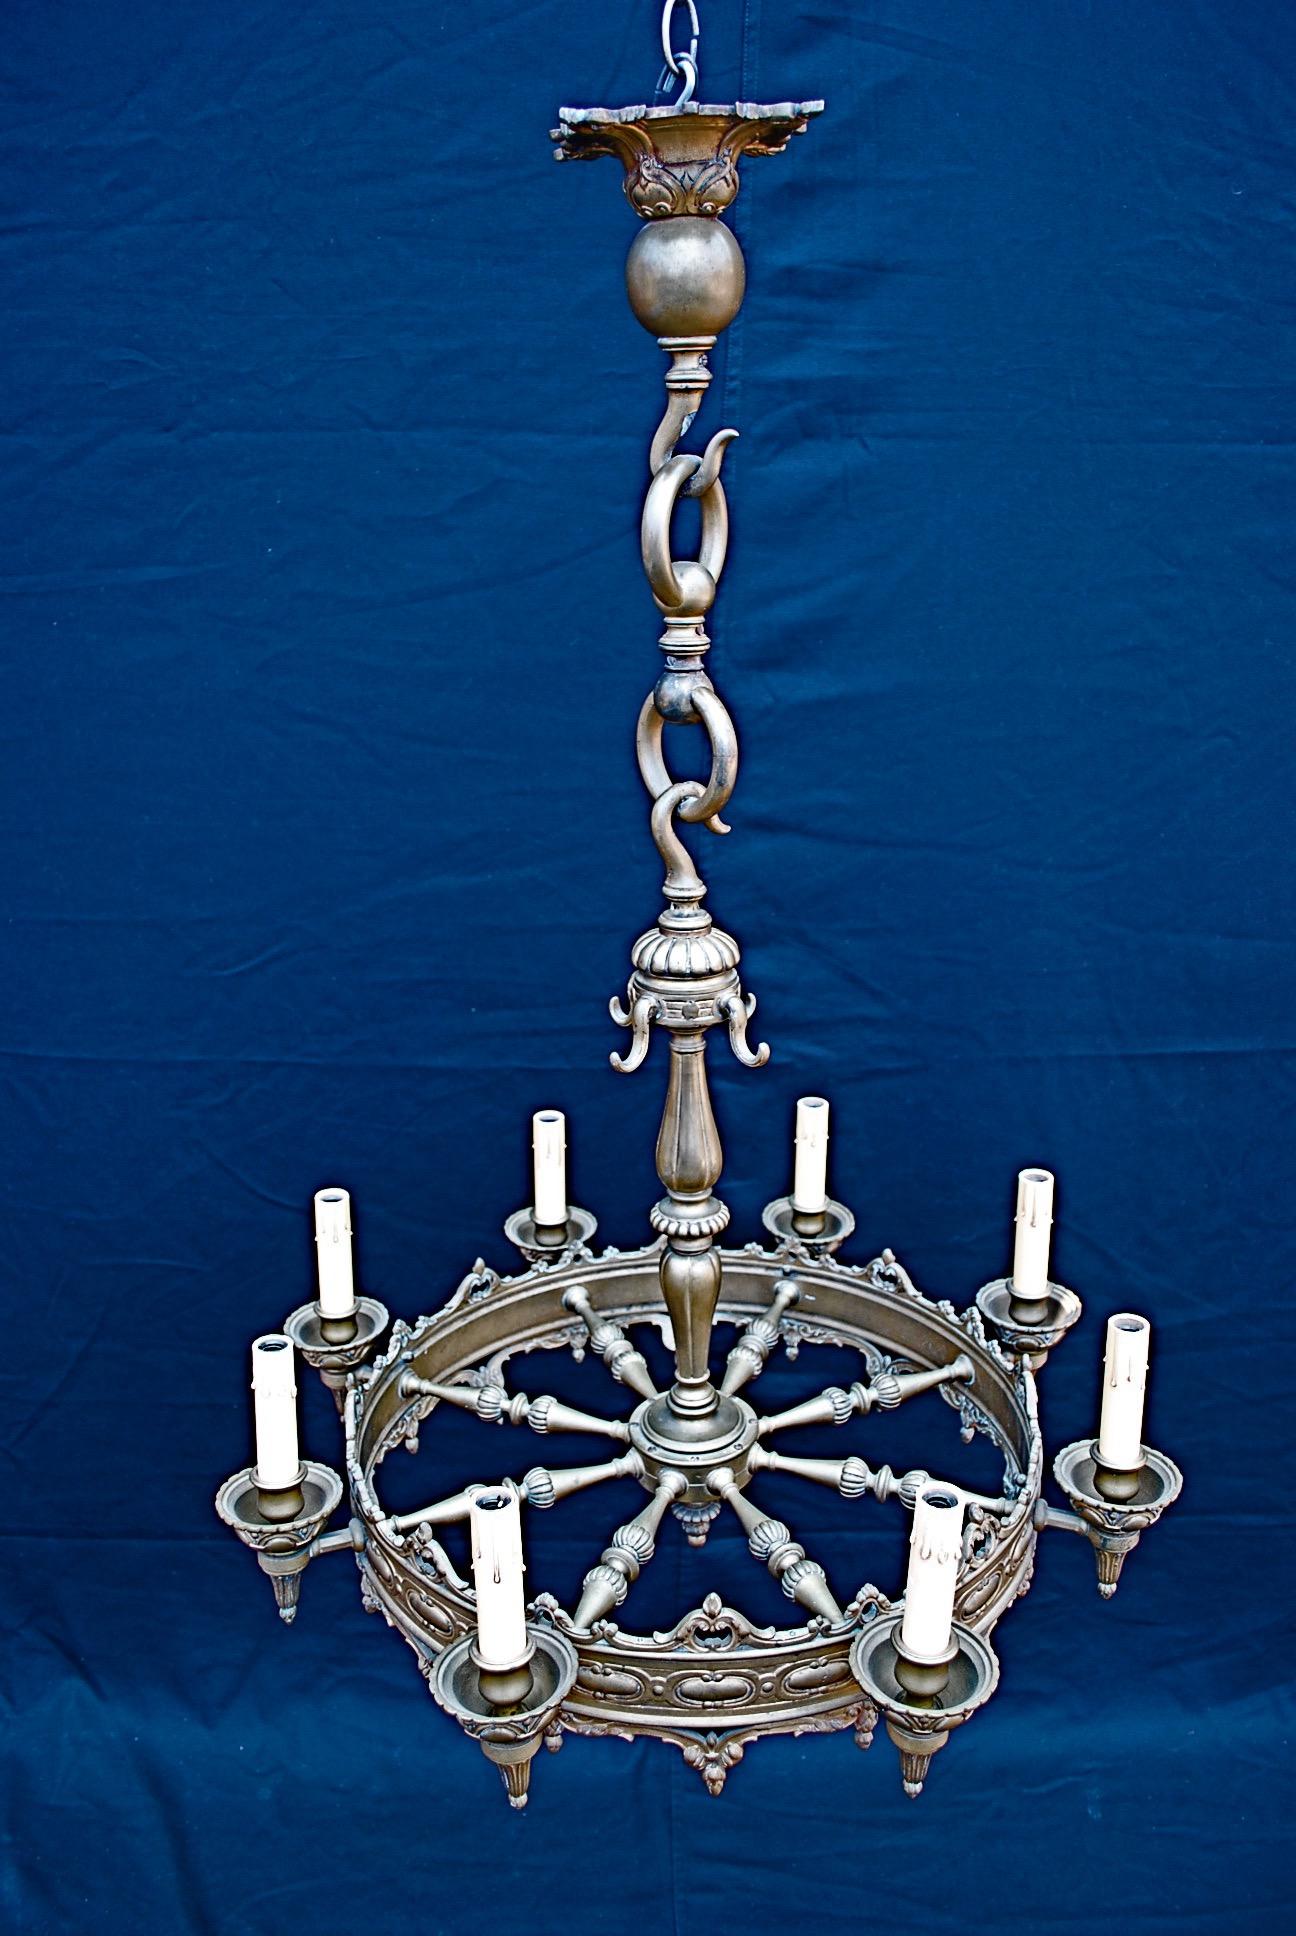 A beautiful and elegant heavy French bronze chandelier, the patina is so much more beautiful in person.

 